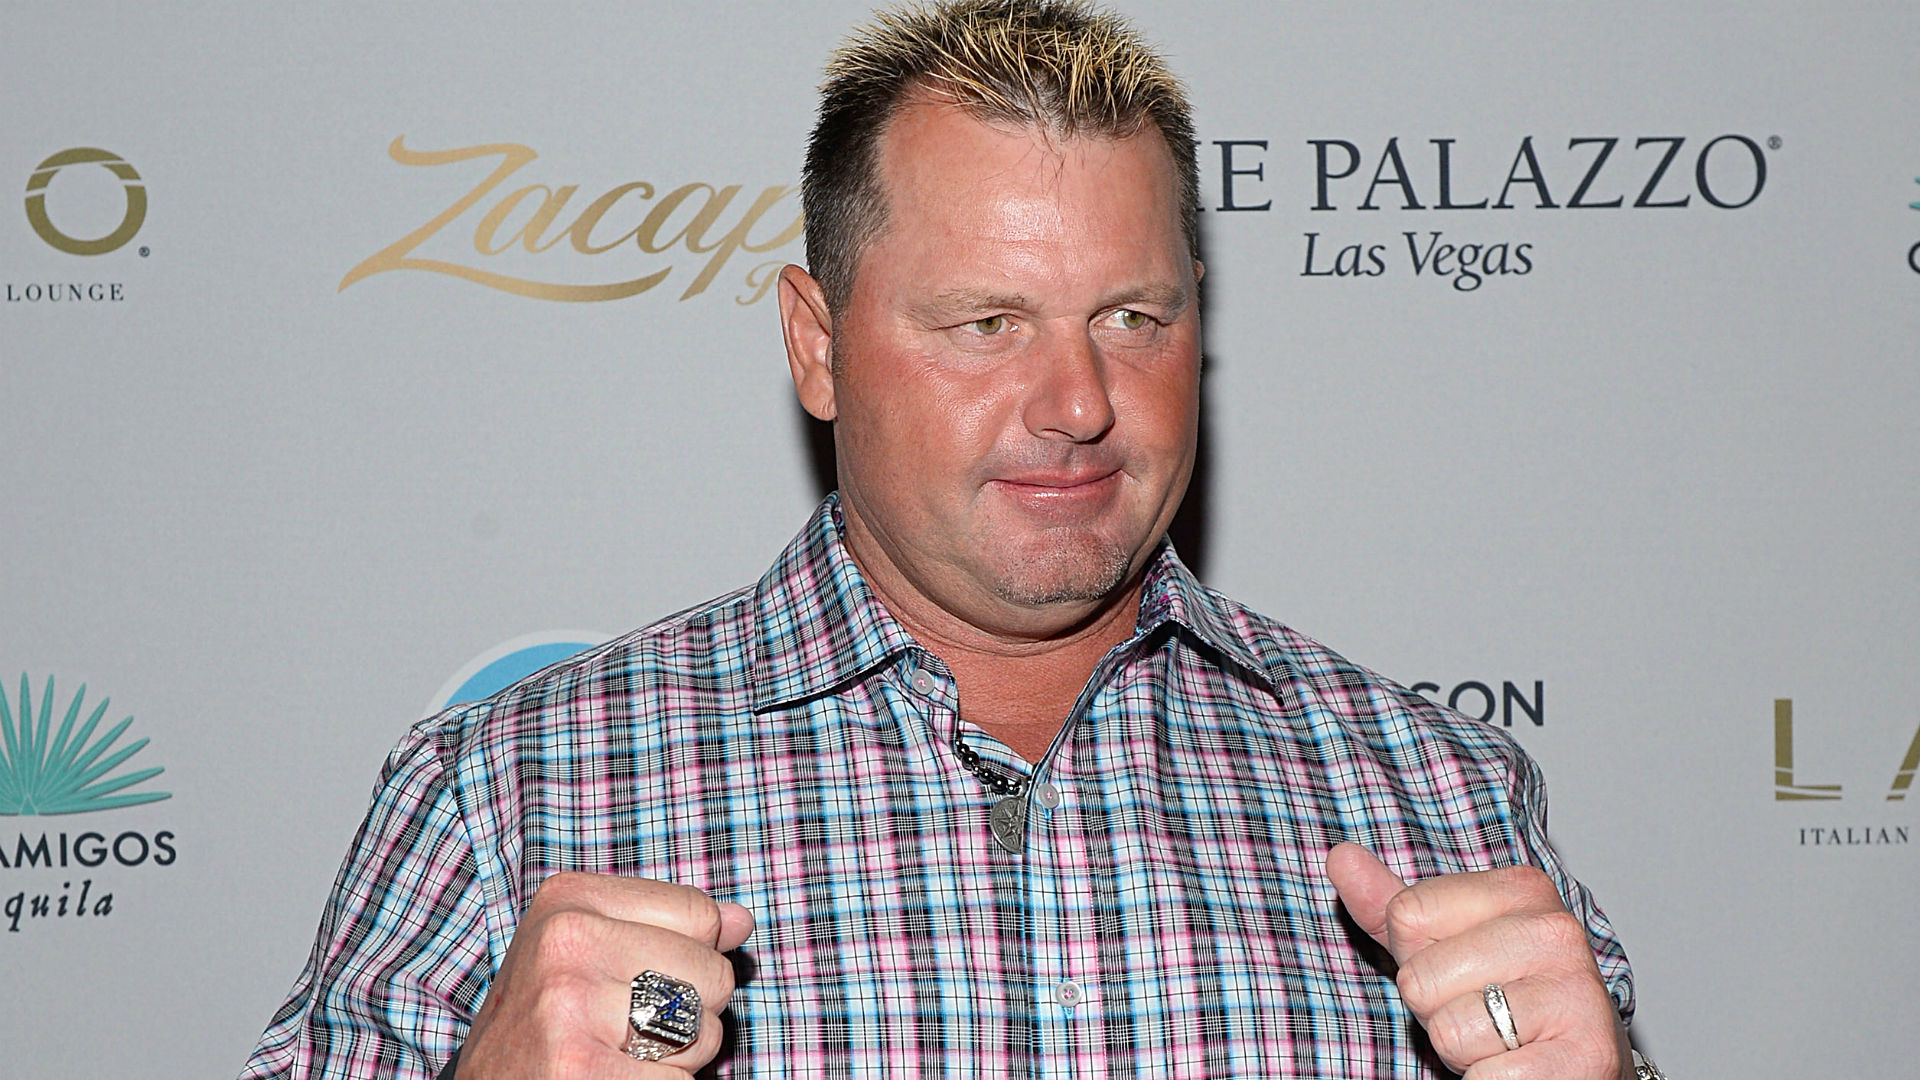 Roger Clemens on Hall of Fame 'I did what I needed to do' MLB